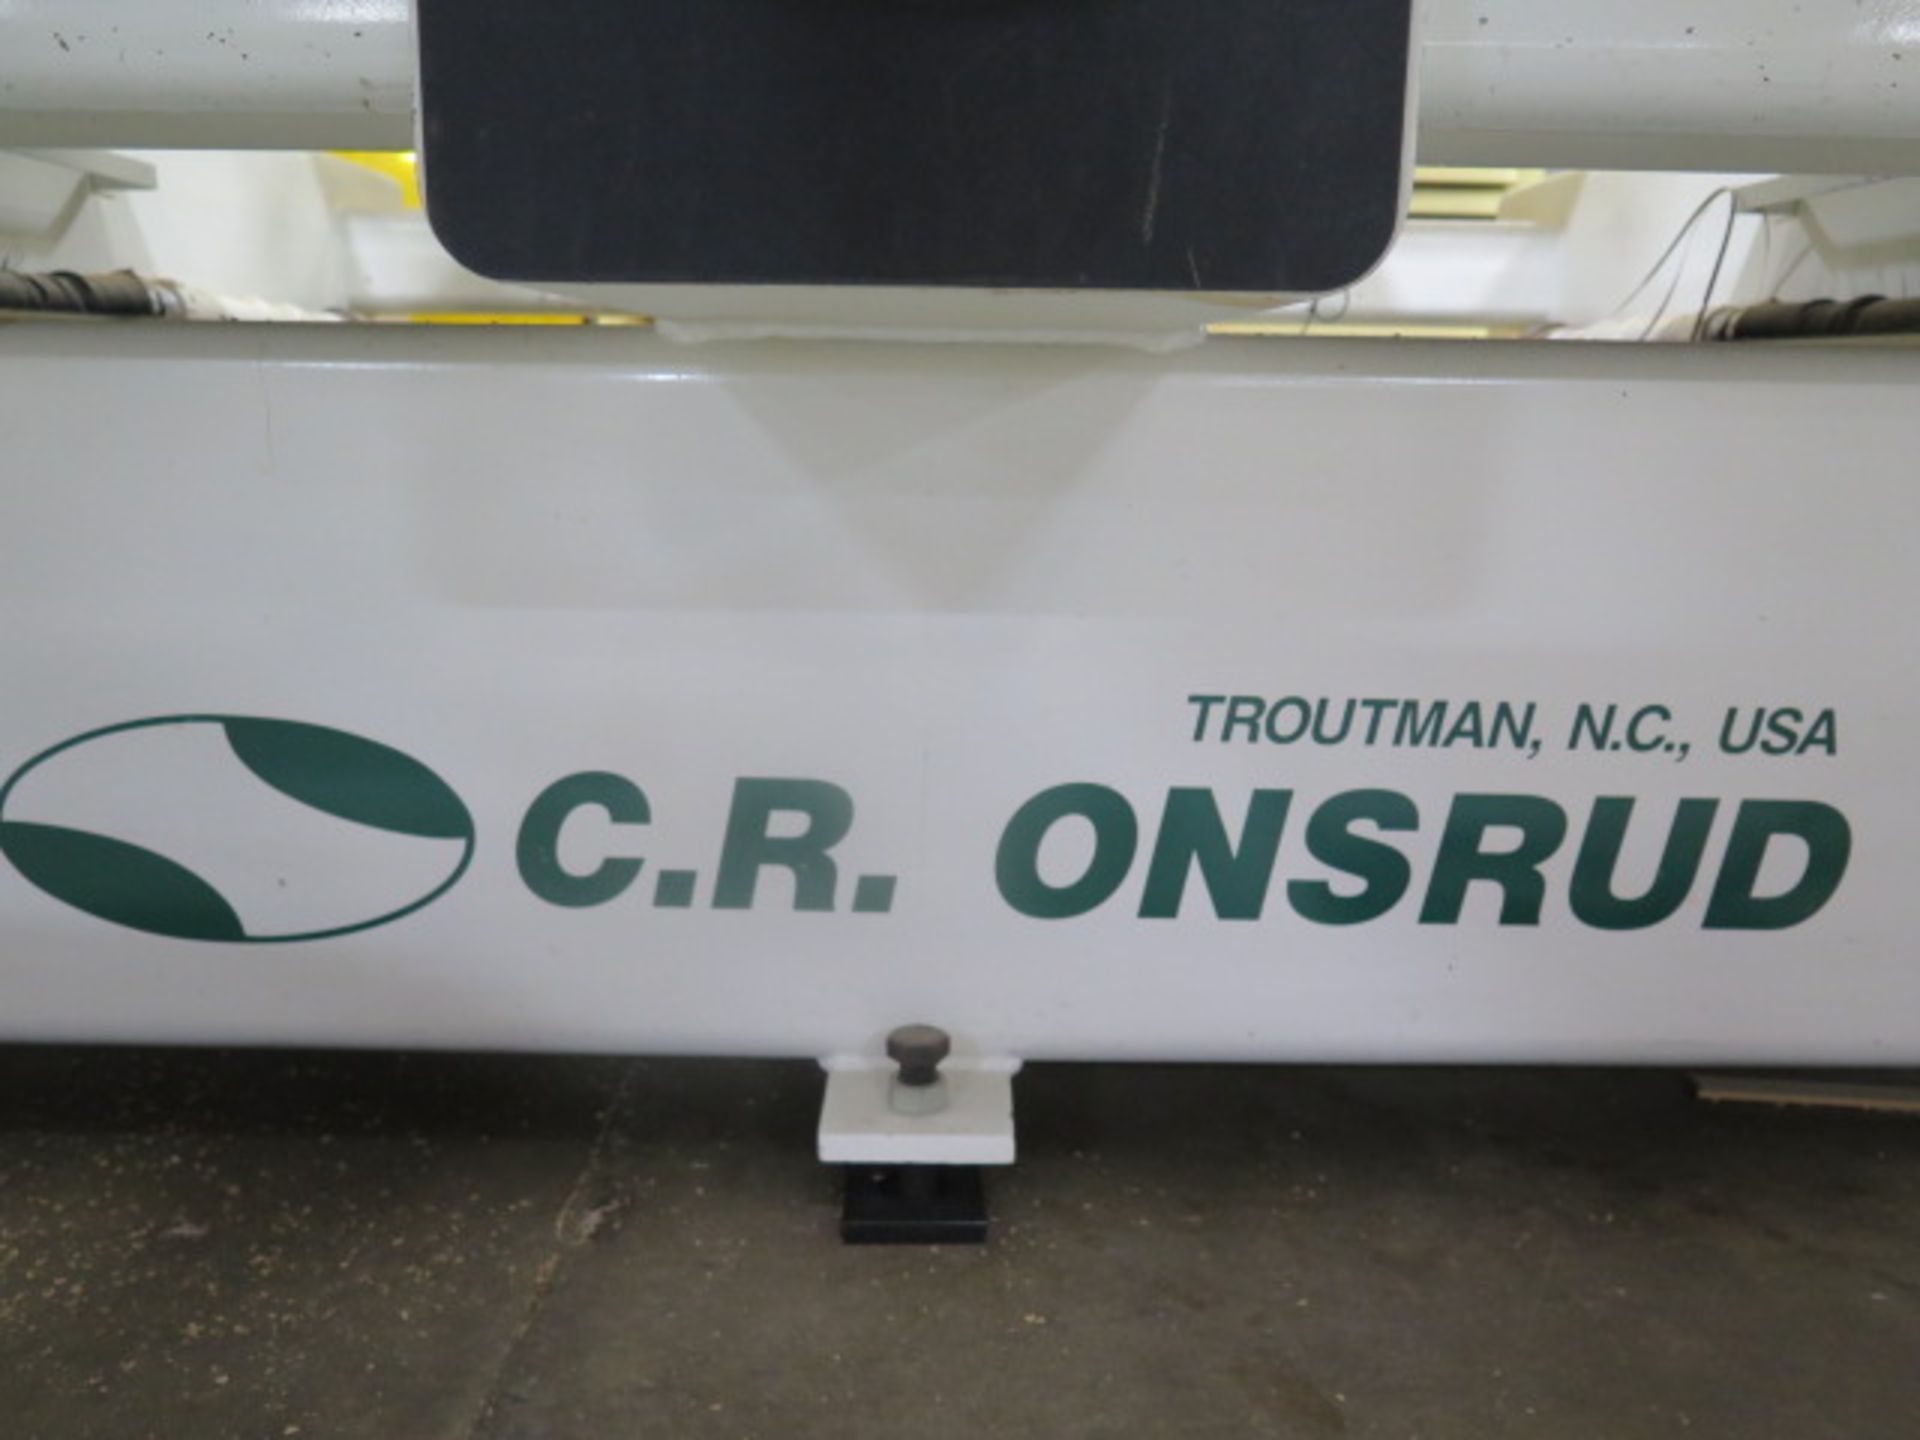 2008 C.R. Onsrud 122C18 CNC Router s/n 12280701 w/ WinMedia CNC Controls, SOLD AS IS - Image 17 of 18